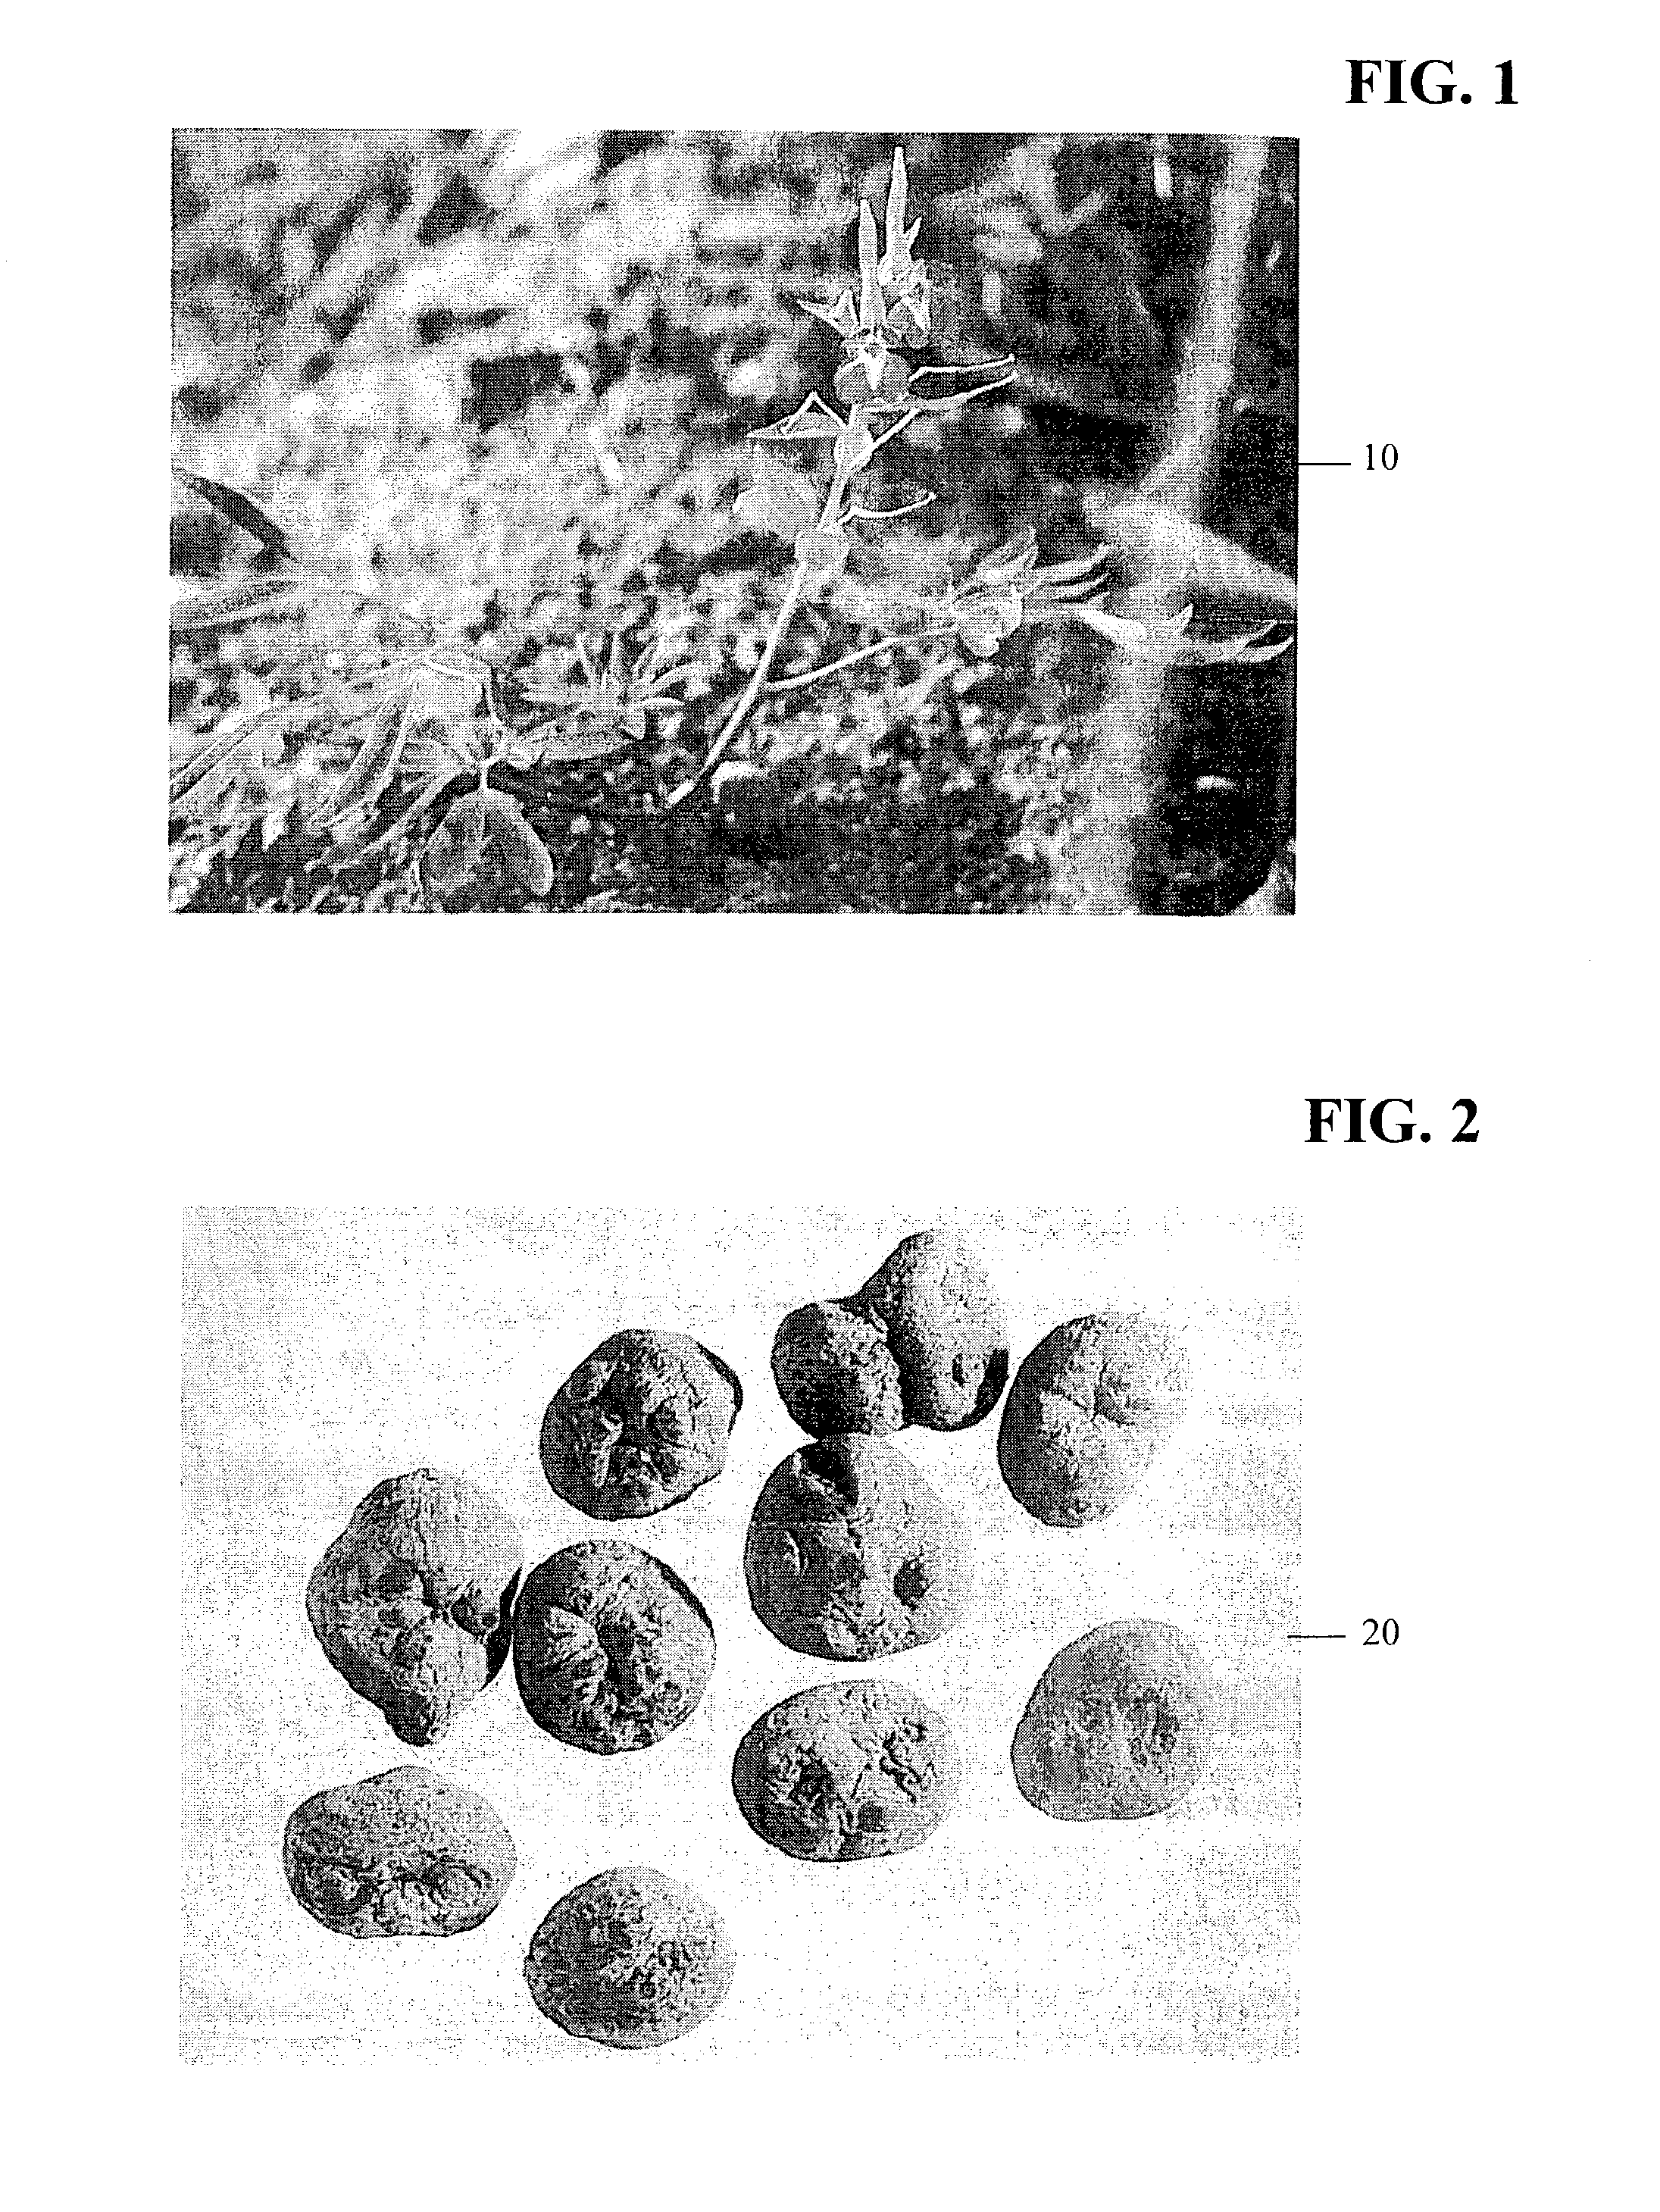 Method for decreasing nicotine and other substance use in humans